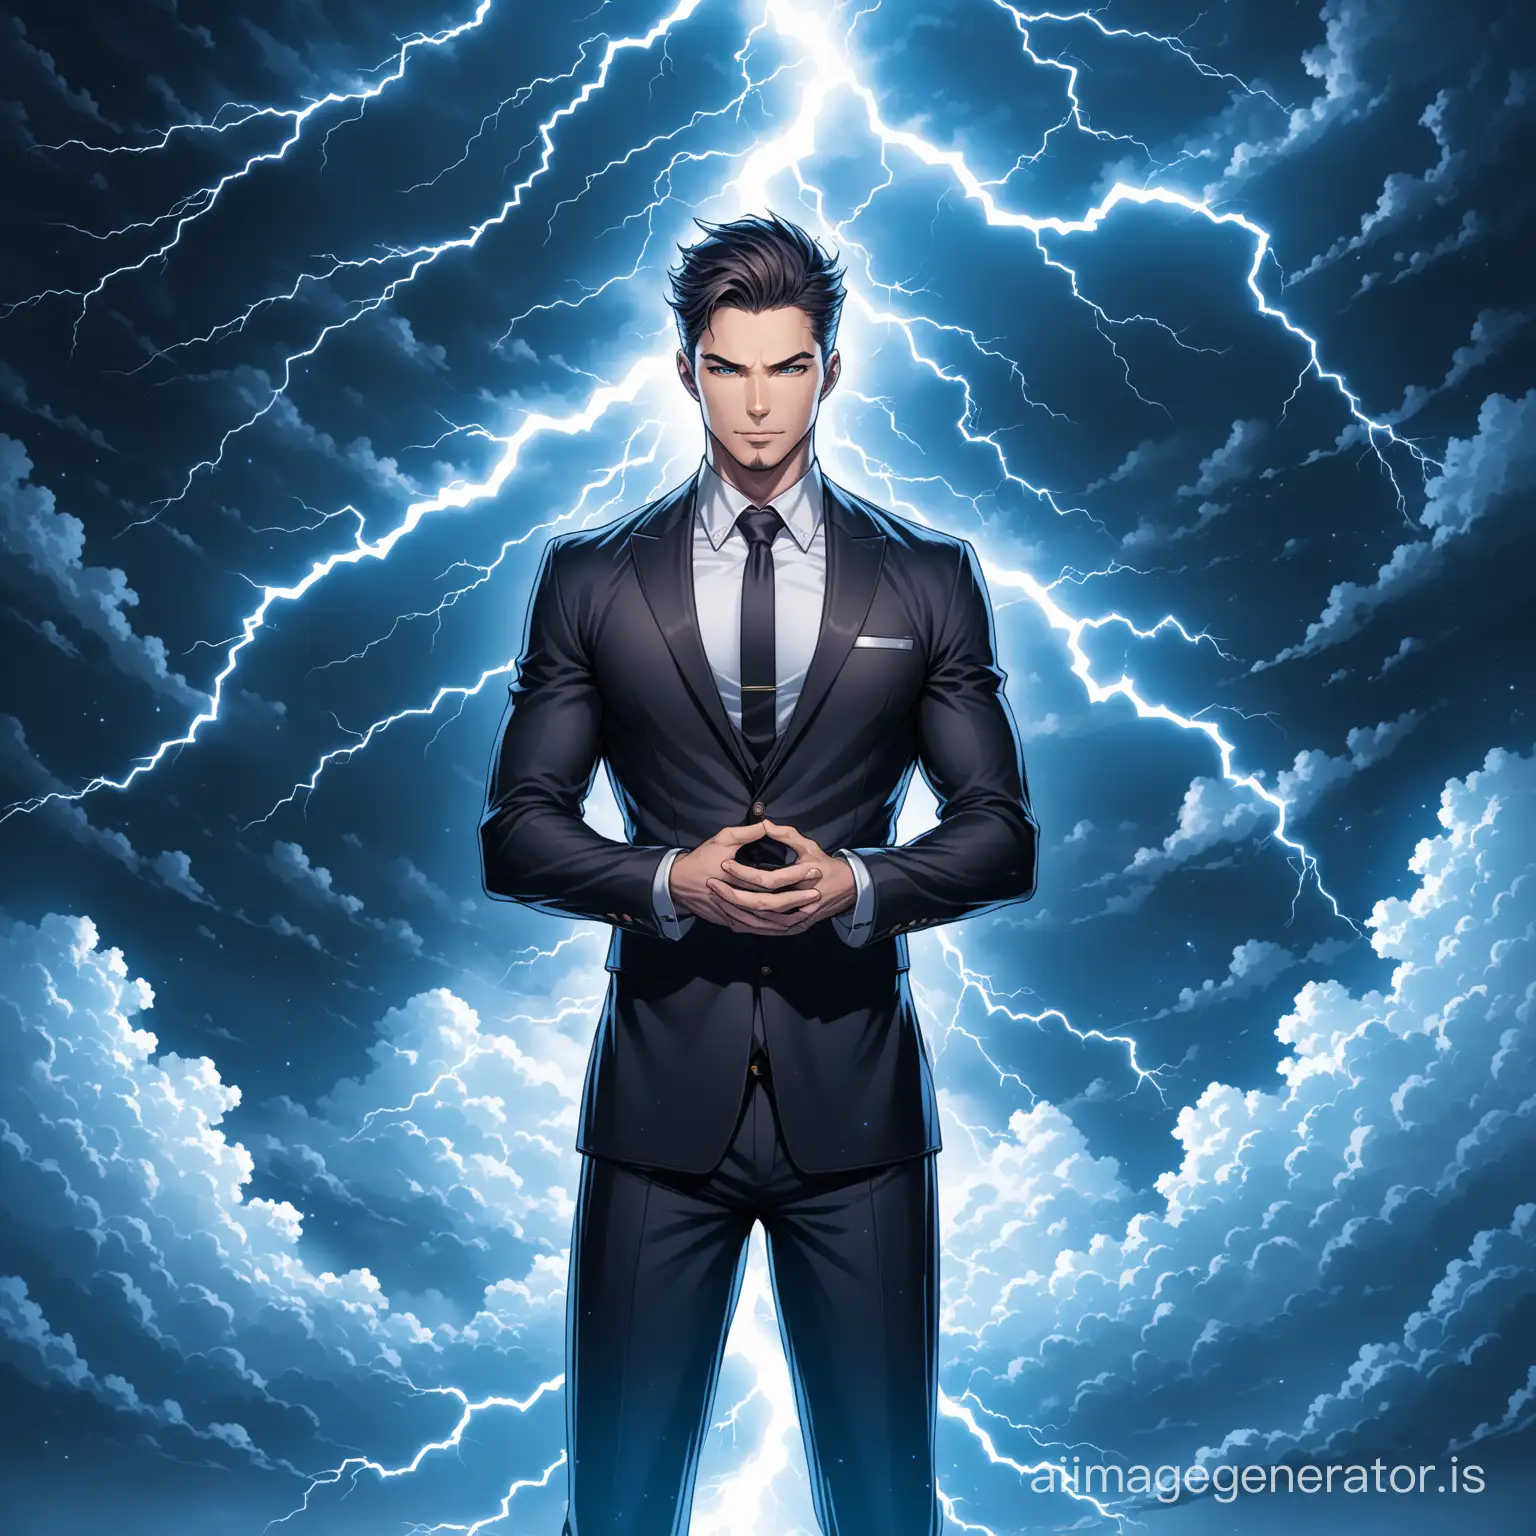 Handsome-Male-Manipulator-Embraced-by-Dramatic-Clouds-and-Lightning